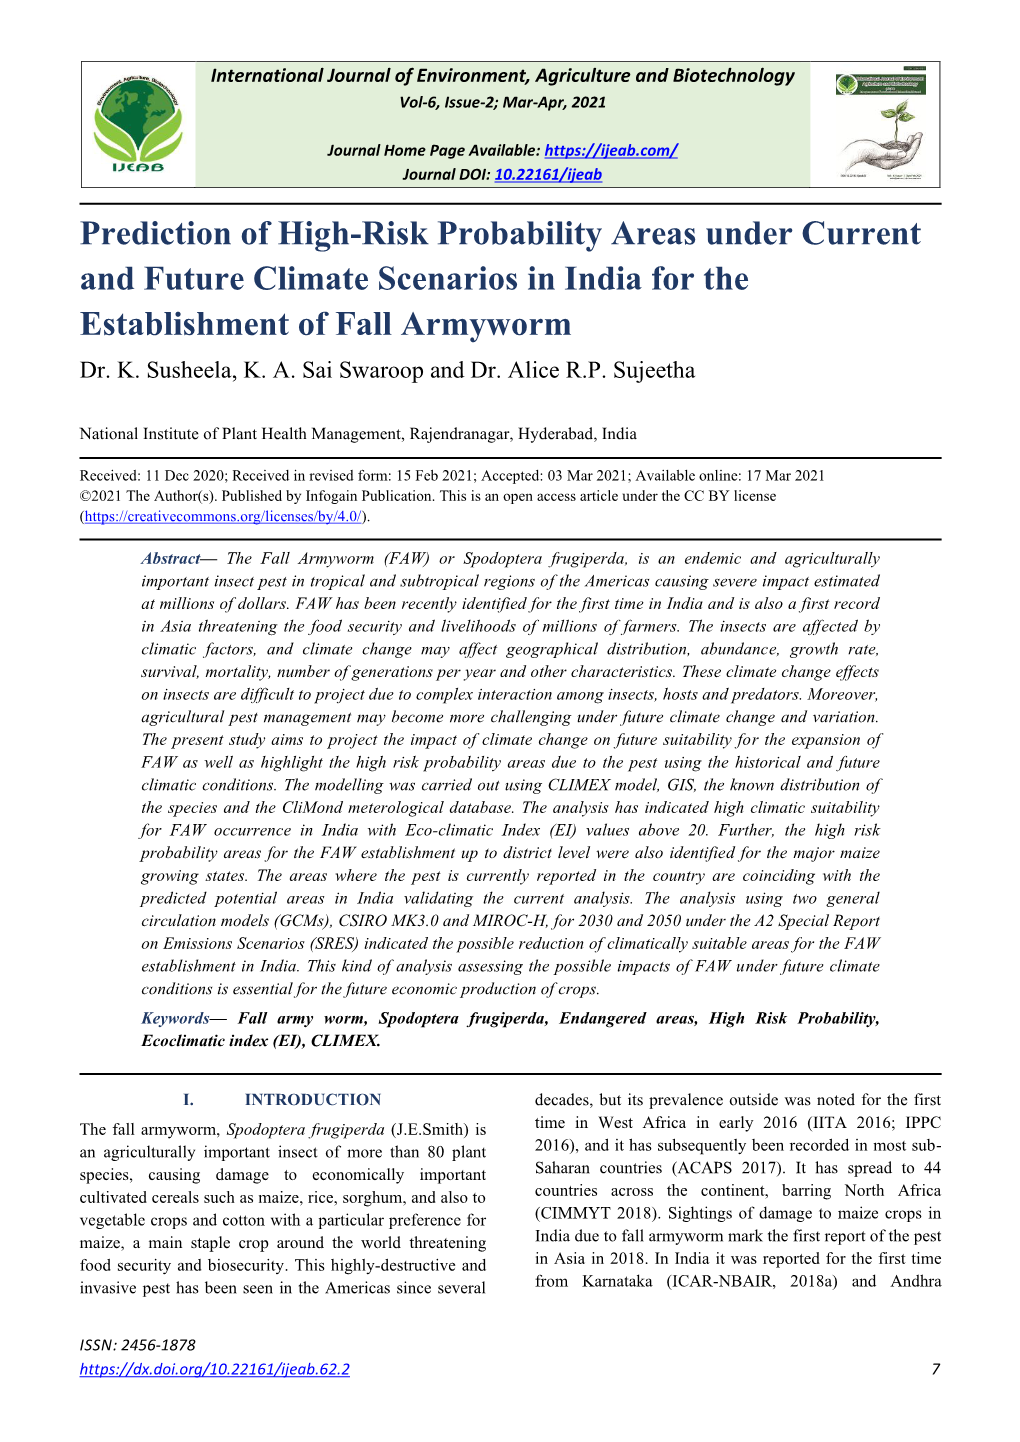 Prediction of High-Risk Probability Areas Under Current and Future Climate Scenarios in India for the Establishment of Fall Armyworm Dr